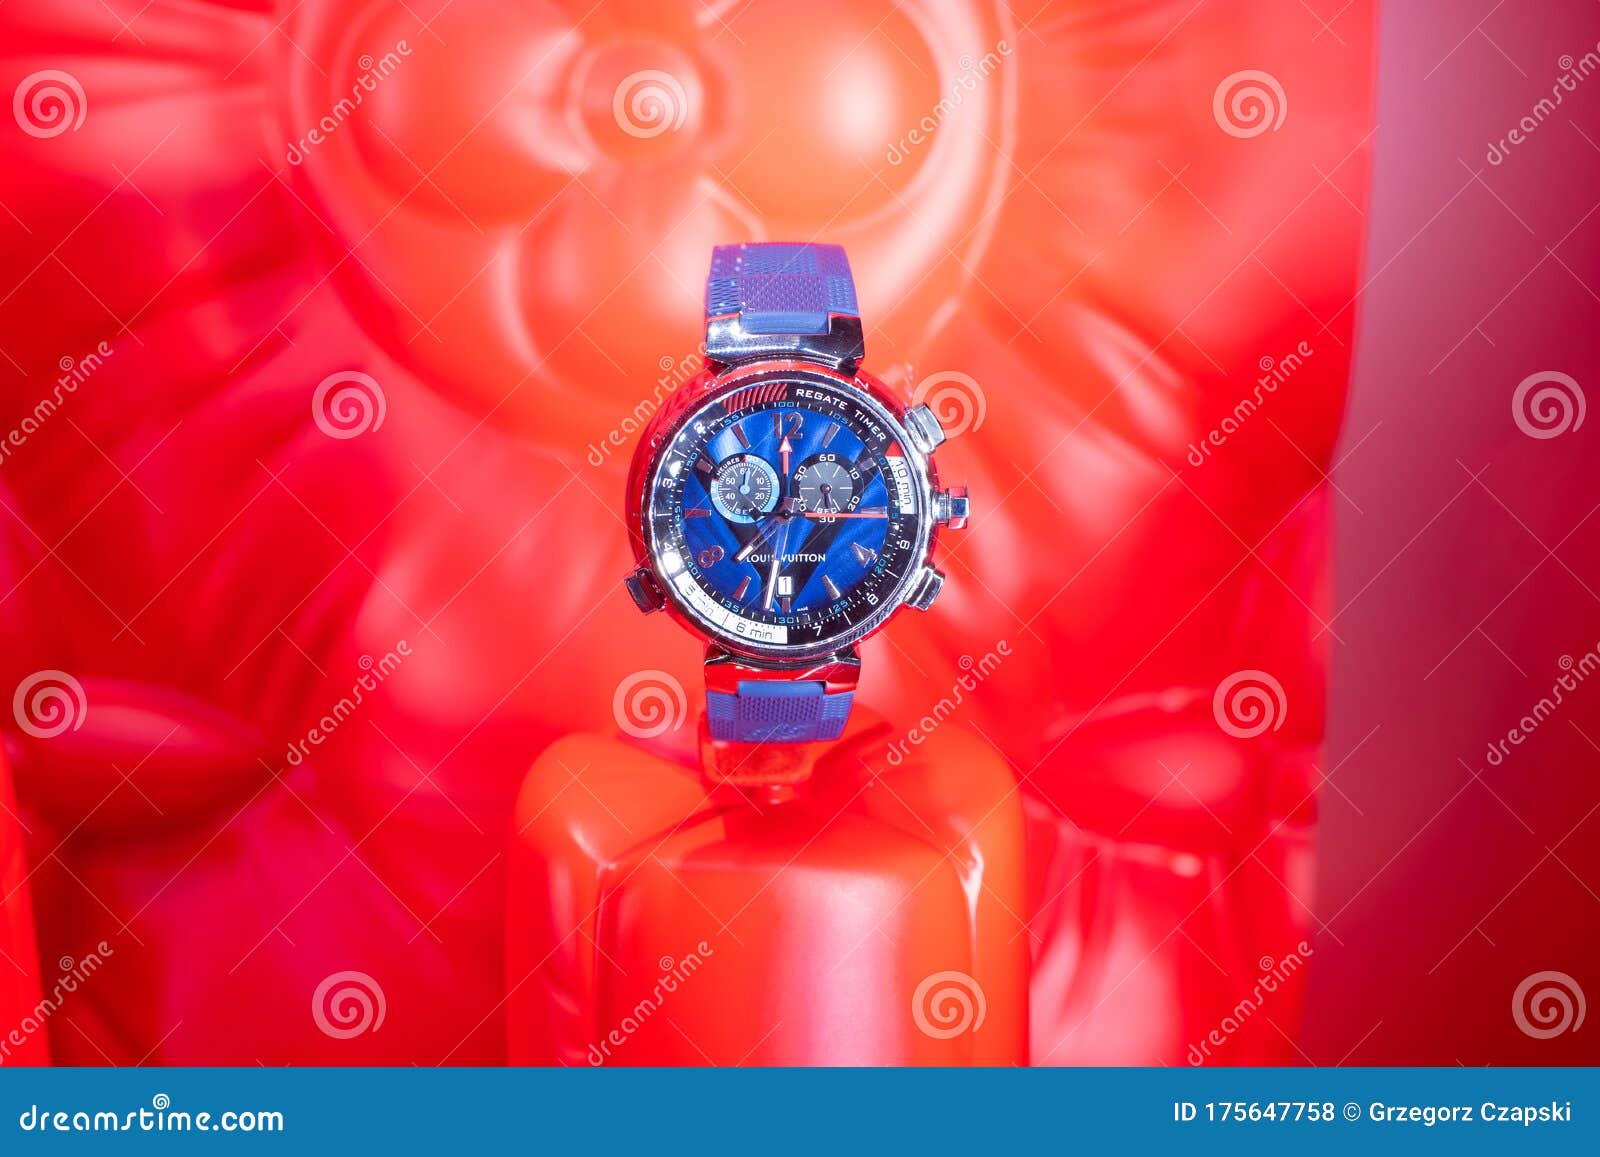 Louis Vuitton Watch on Display for Sale, LV Louis Vuitton is Fashion House  and Luxury Retail Company Editorial Stock Photo - Image of luxurious,  illustrative: 175647758